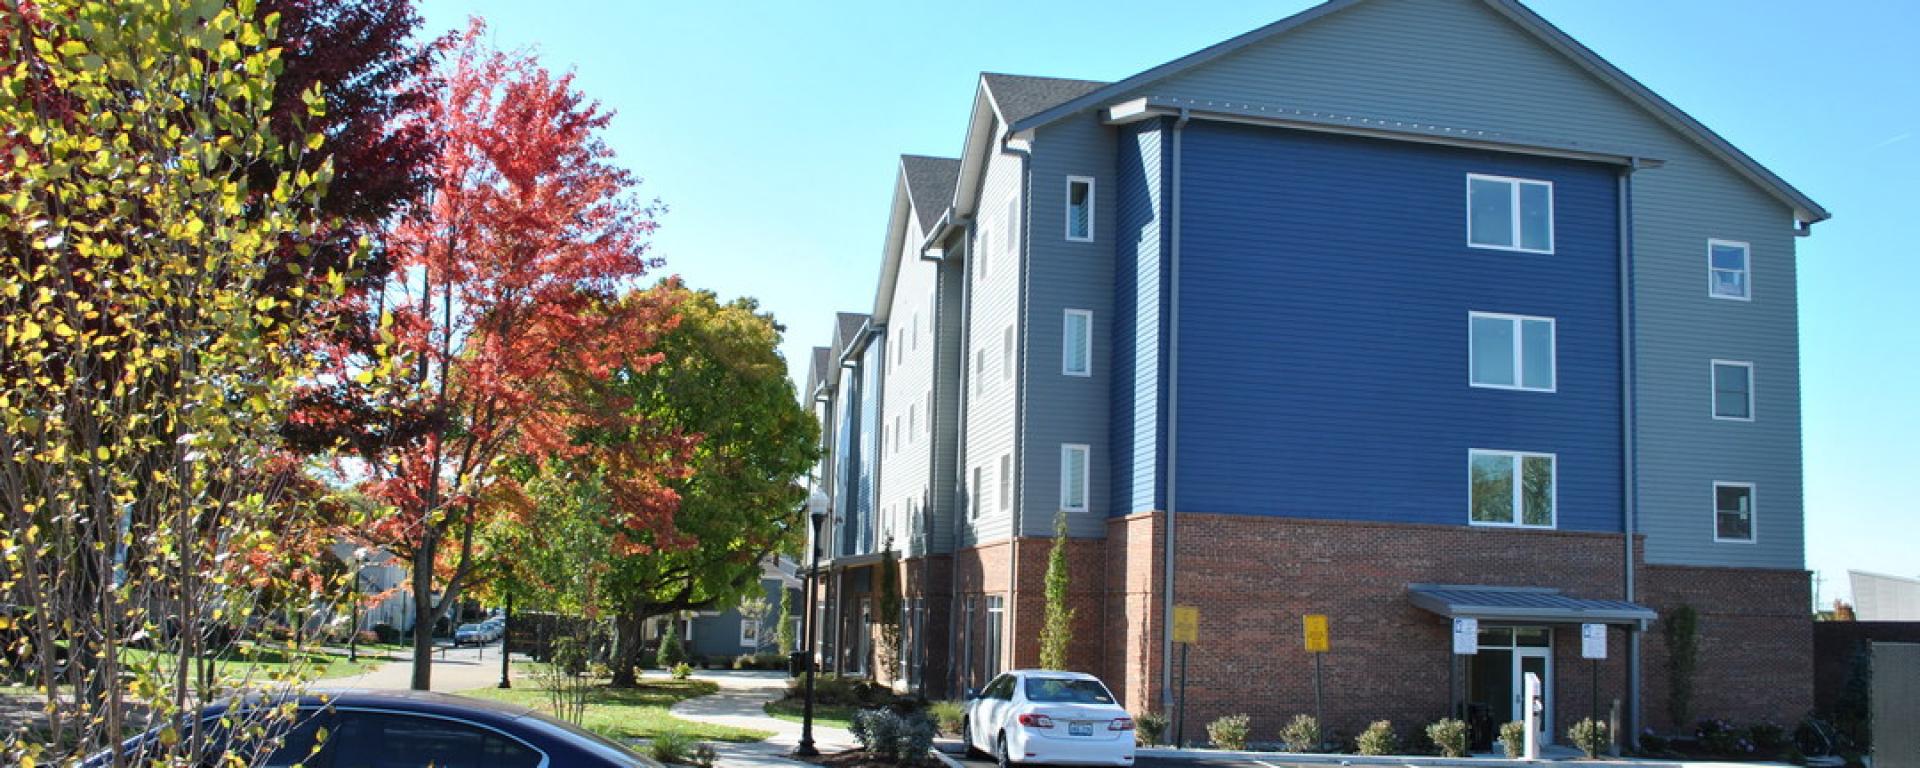 side profile of student housing during fall